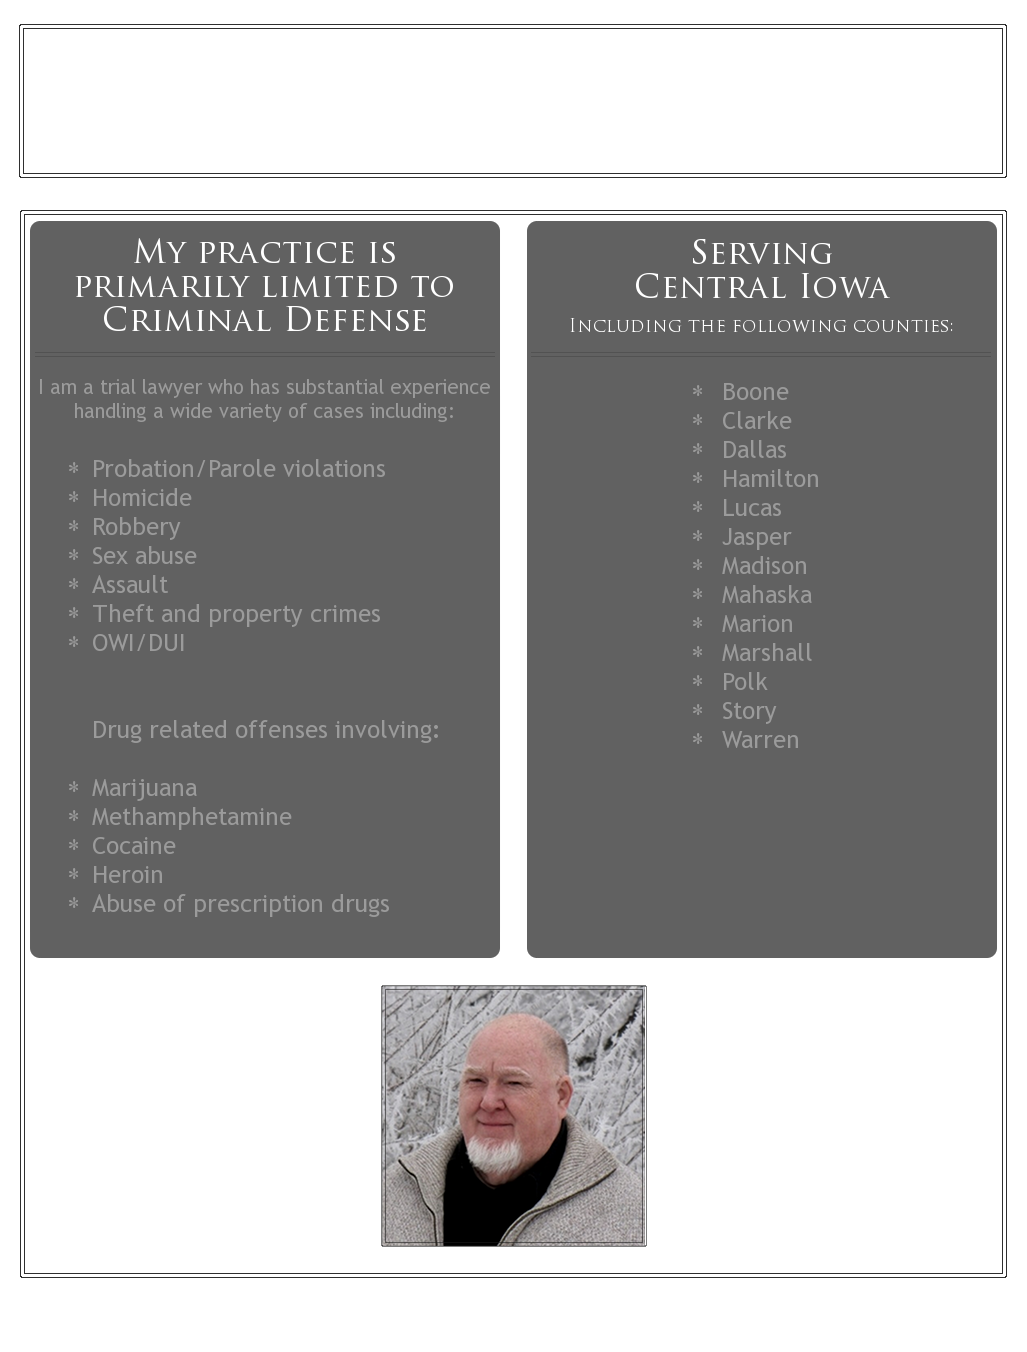 Wes Dunbar Attorney at Law. Central Iowa Criminal Defense. Serving the following counties: Polk, Warren, Jasper, Dallas, Story, Marshall, Marion, Boone, Clarke, Madison, Wahaska, Lucas, Hamilton. I am a trial lawyer with substantial experience handling a wide variety of cases including Probation/Parole violations, Homicide, Robbery, Sex abuse, Assault, OWI, DUI, Drug related offenses including: Marijuana, Cocaine, Methamphetamines, Heroin, Abuse of prescription drugs. I can meet you in convenient places and after hours, if necessary. Phone: (515) 306-3333 Fax: (515) 961-7566 Email: wdunbarlaw@aol.com